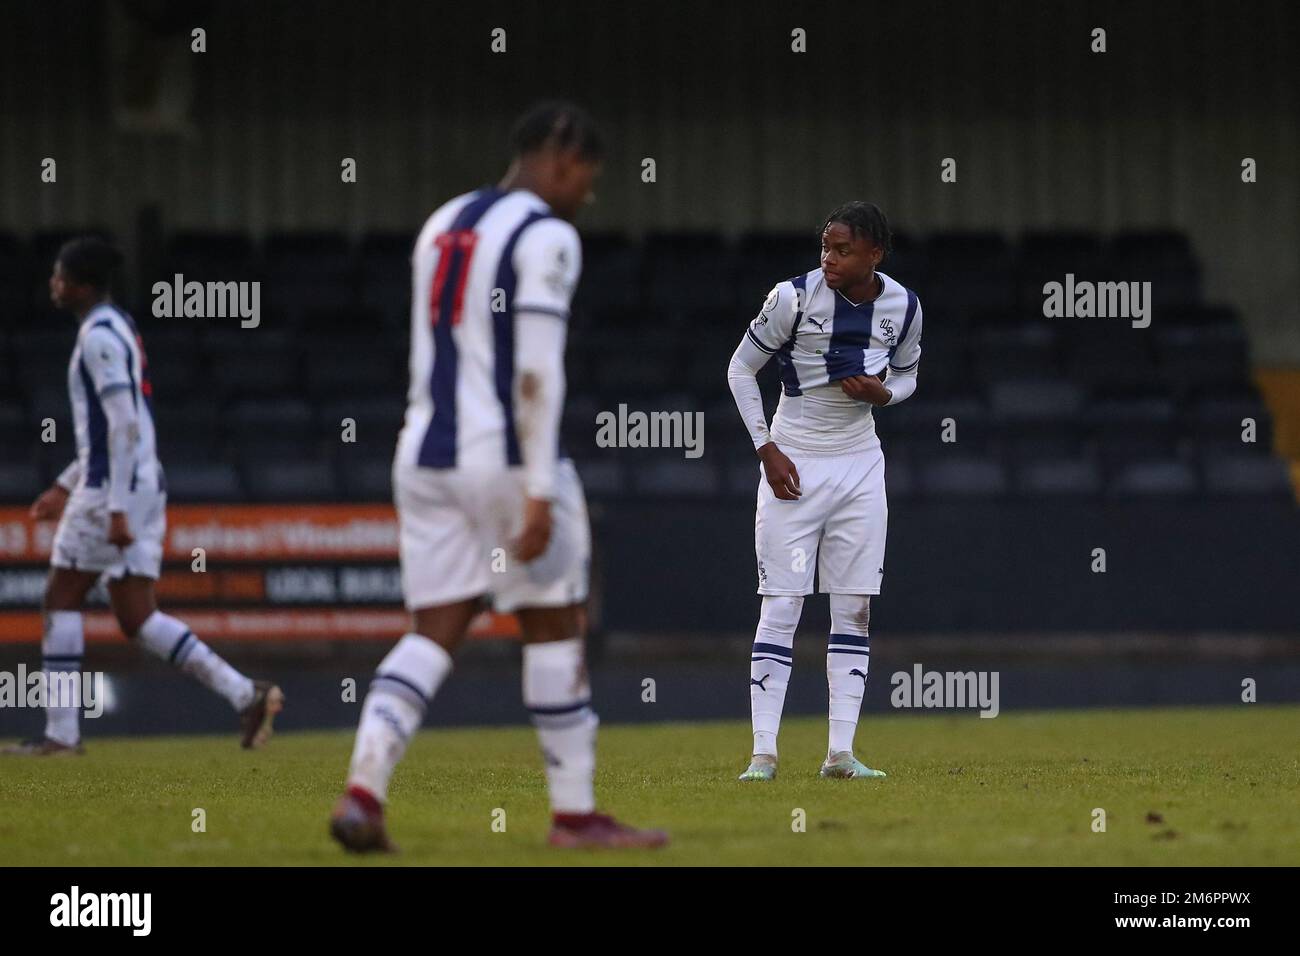 Hednesford, UK. 05th Jan, 2023. Akeel Higgins of West Bromwich Albion reacts at full time in the Premier League Cup match West Bromwich Albion vs Middlesbrough U23's at Keys Park, Hednesford, United Kingdom, 5th January 2023 (Photo by Gareth Evans/News Images) Credit: News Images LTD/Alamy Live News Stock Photo